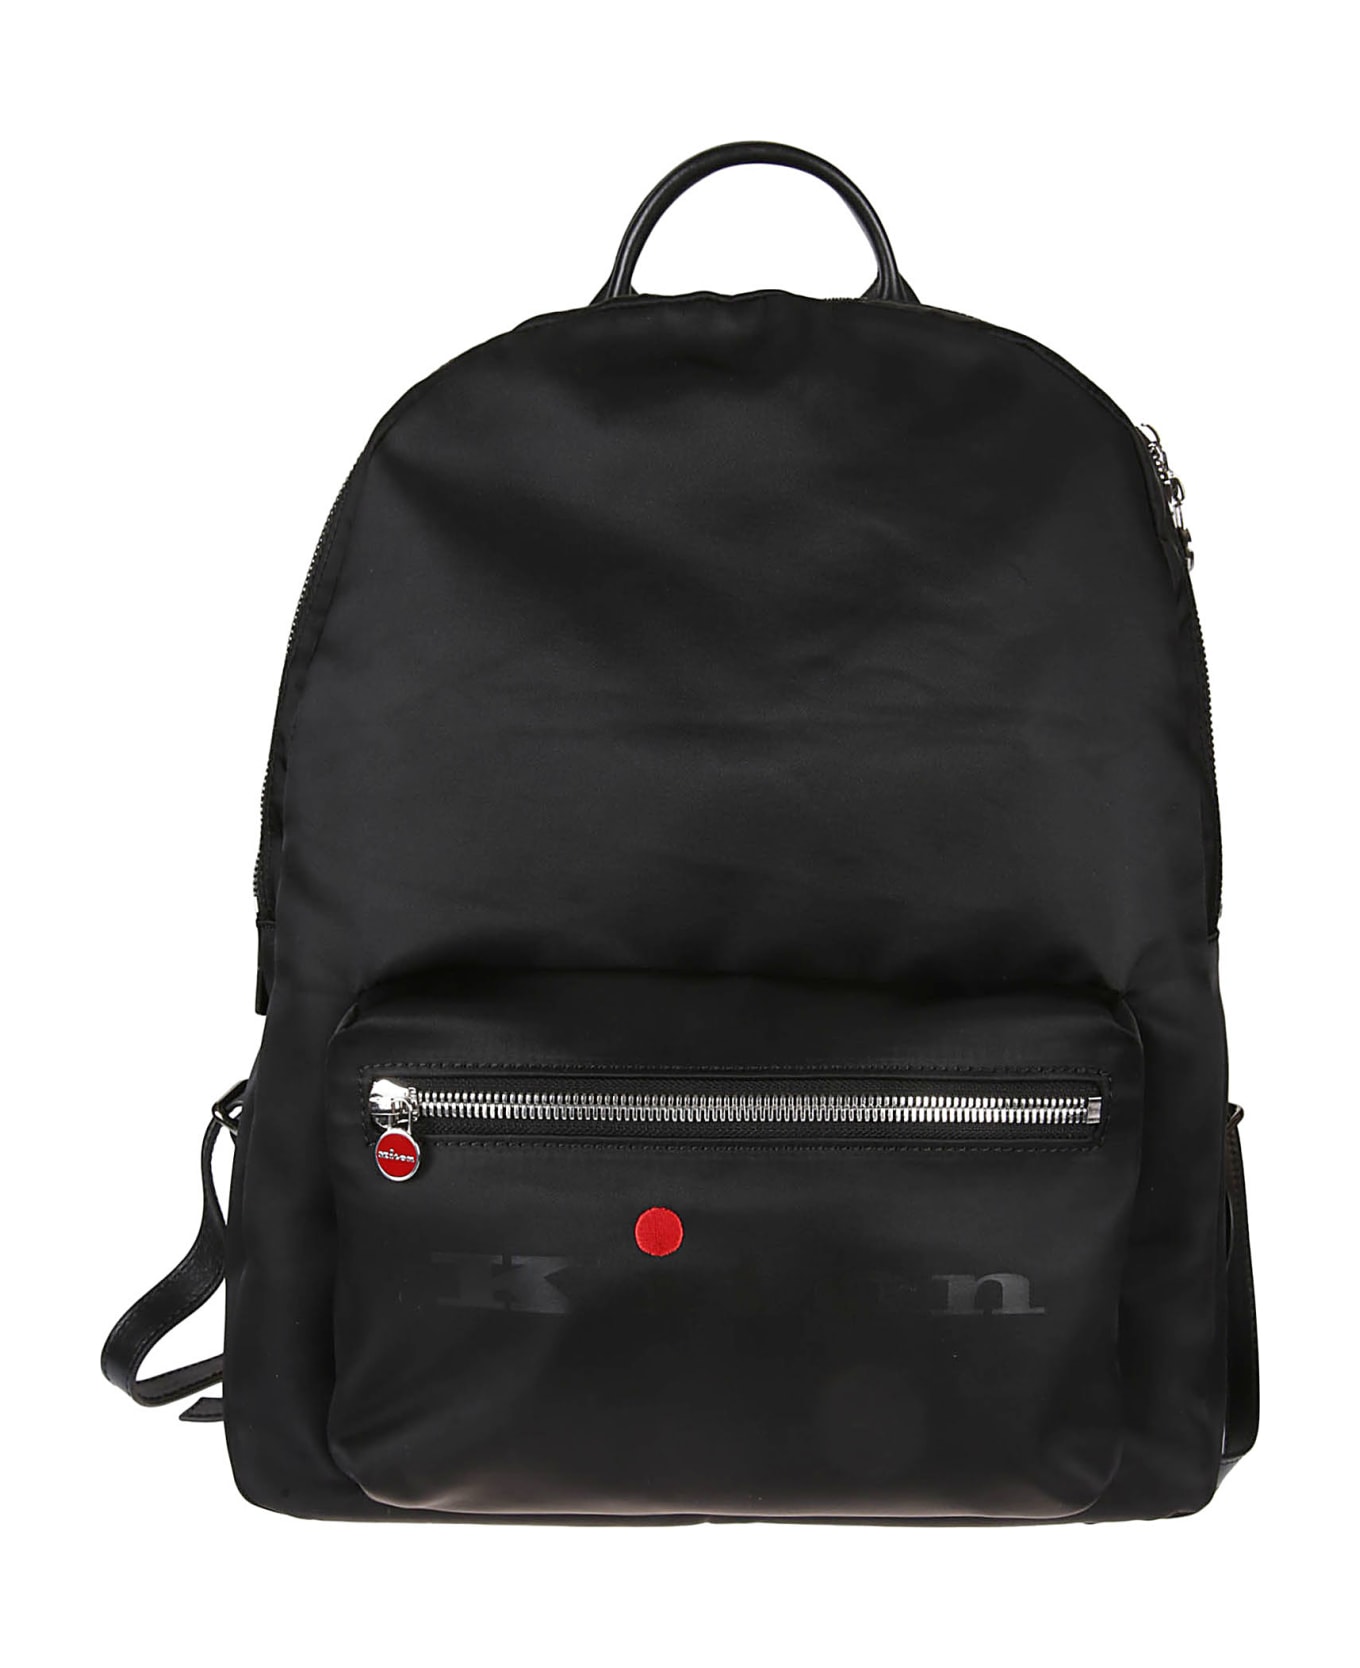 Kiton A0021 Backpack - Nero バックパック